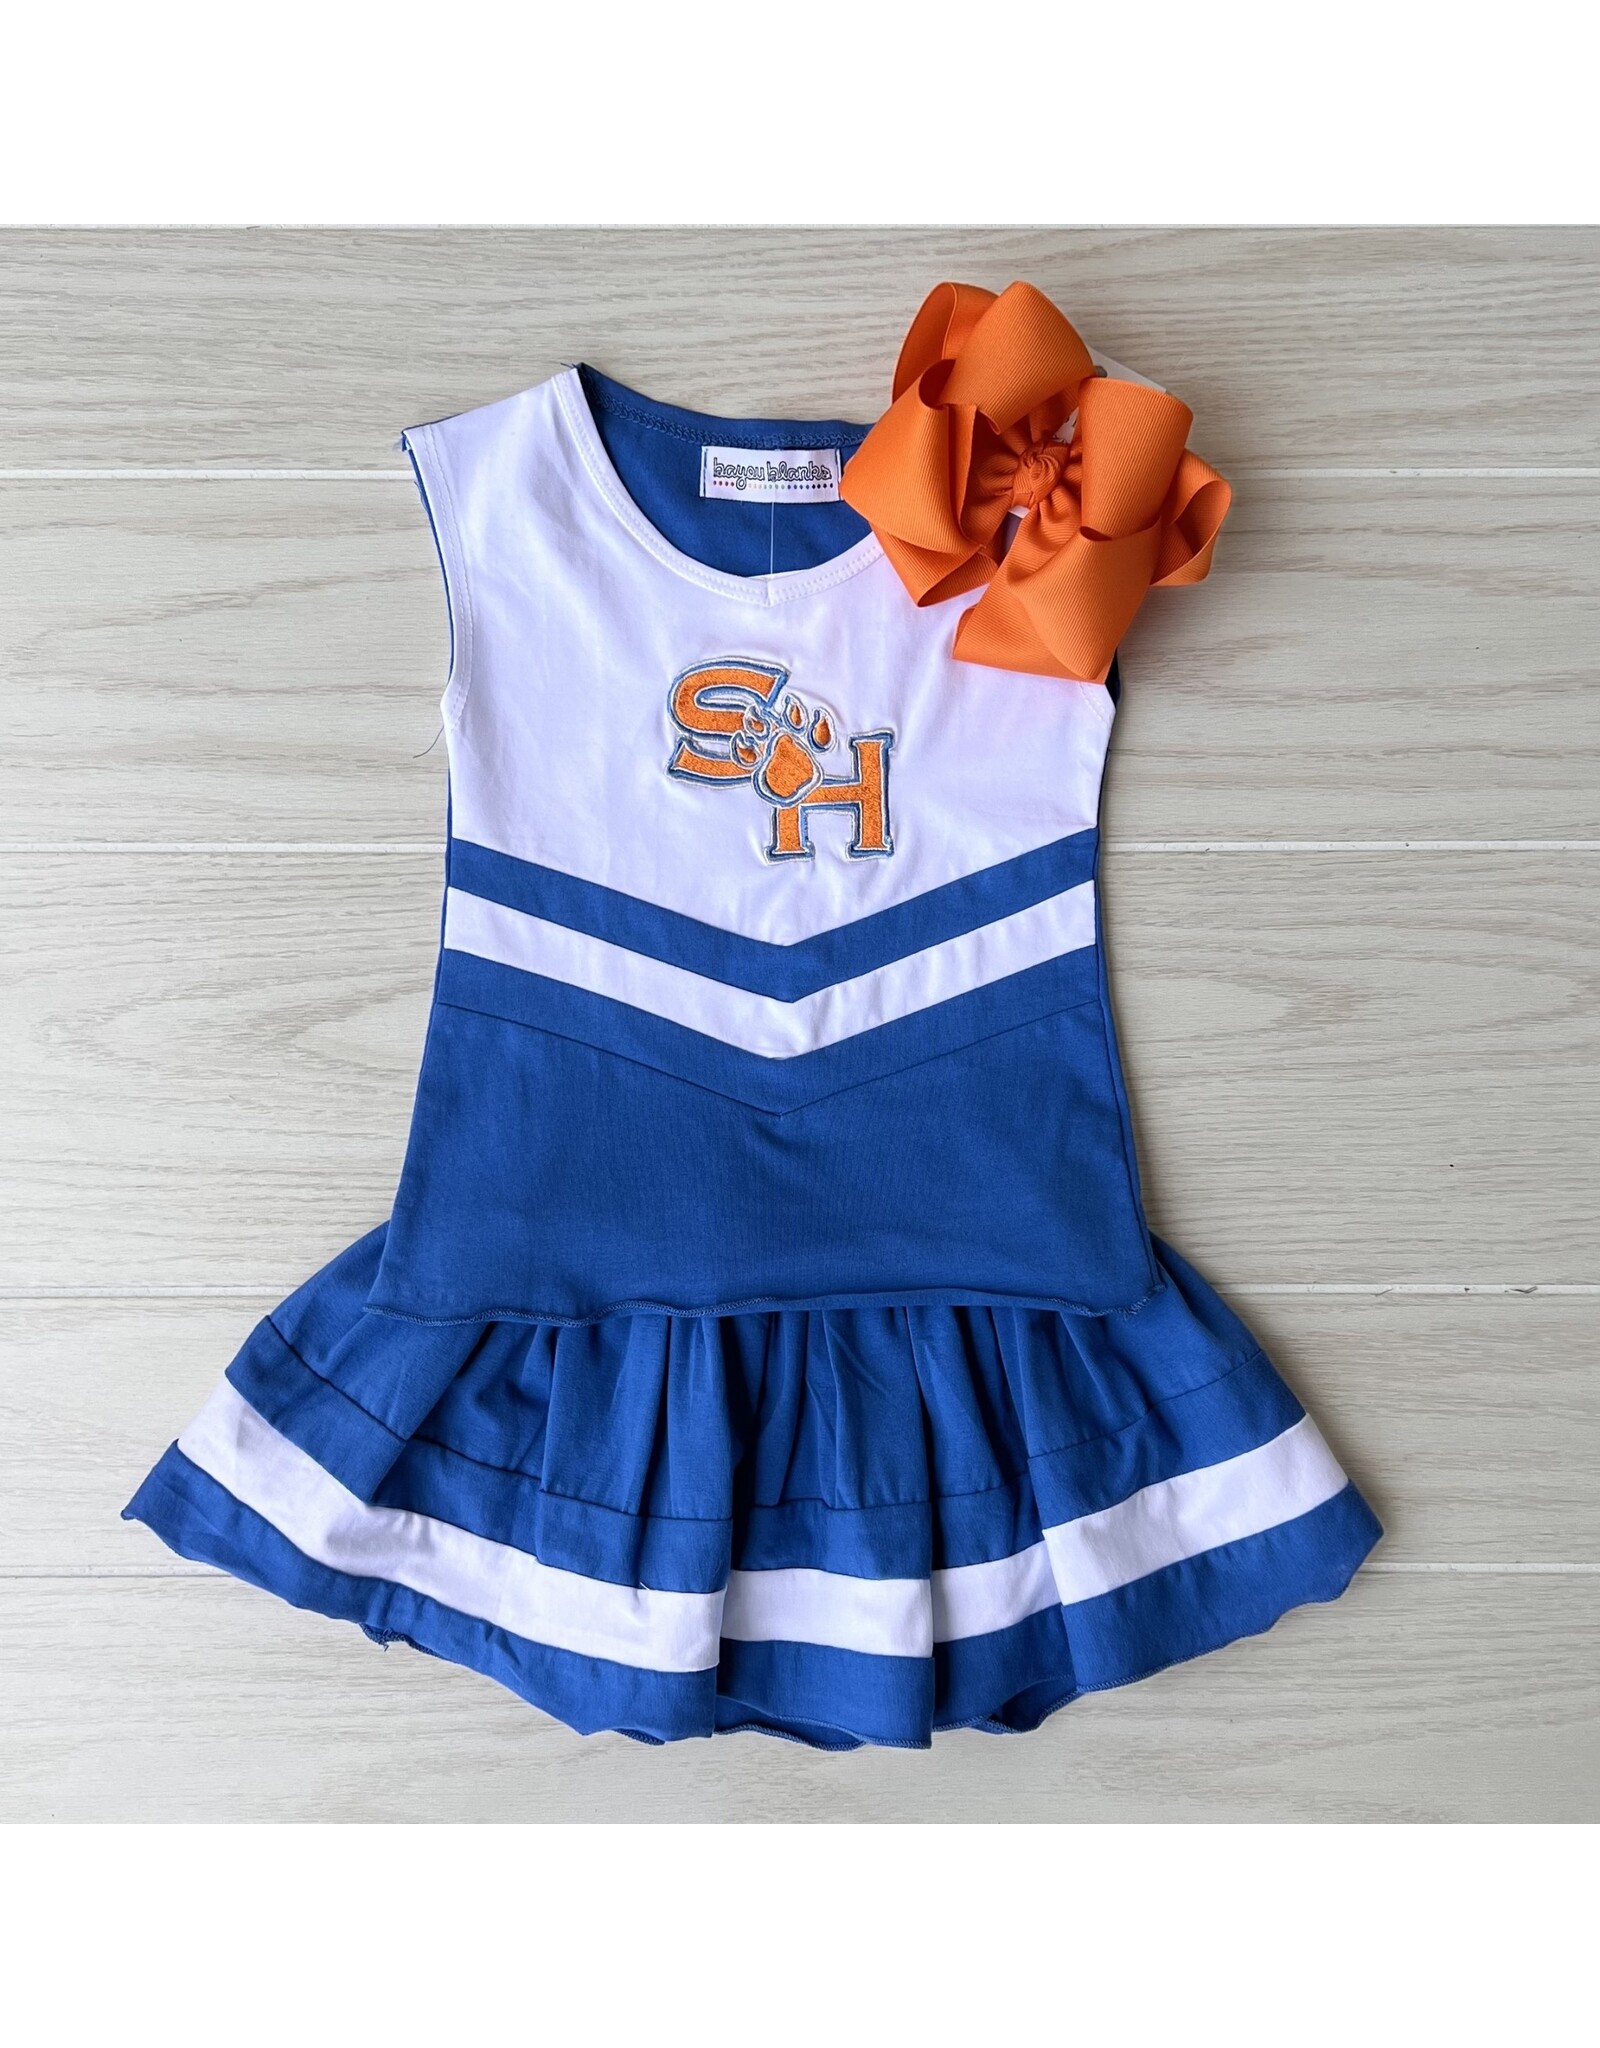 Sam Houston Cheer Outfit